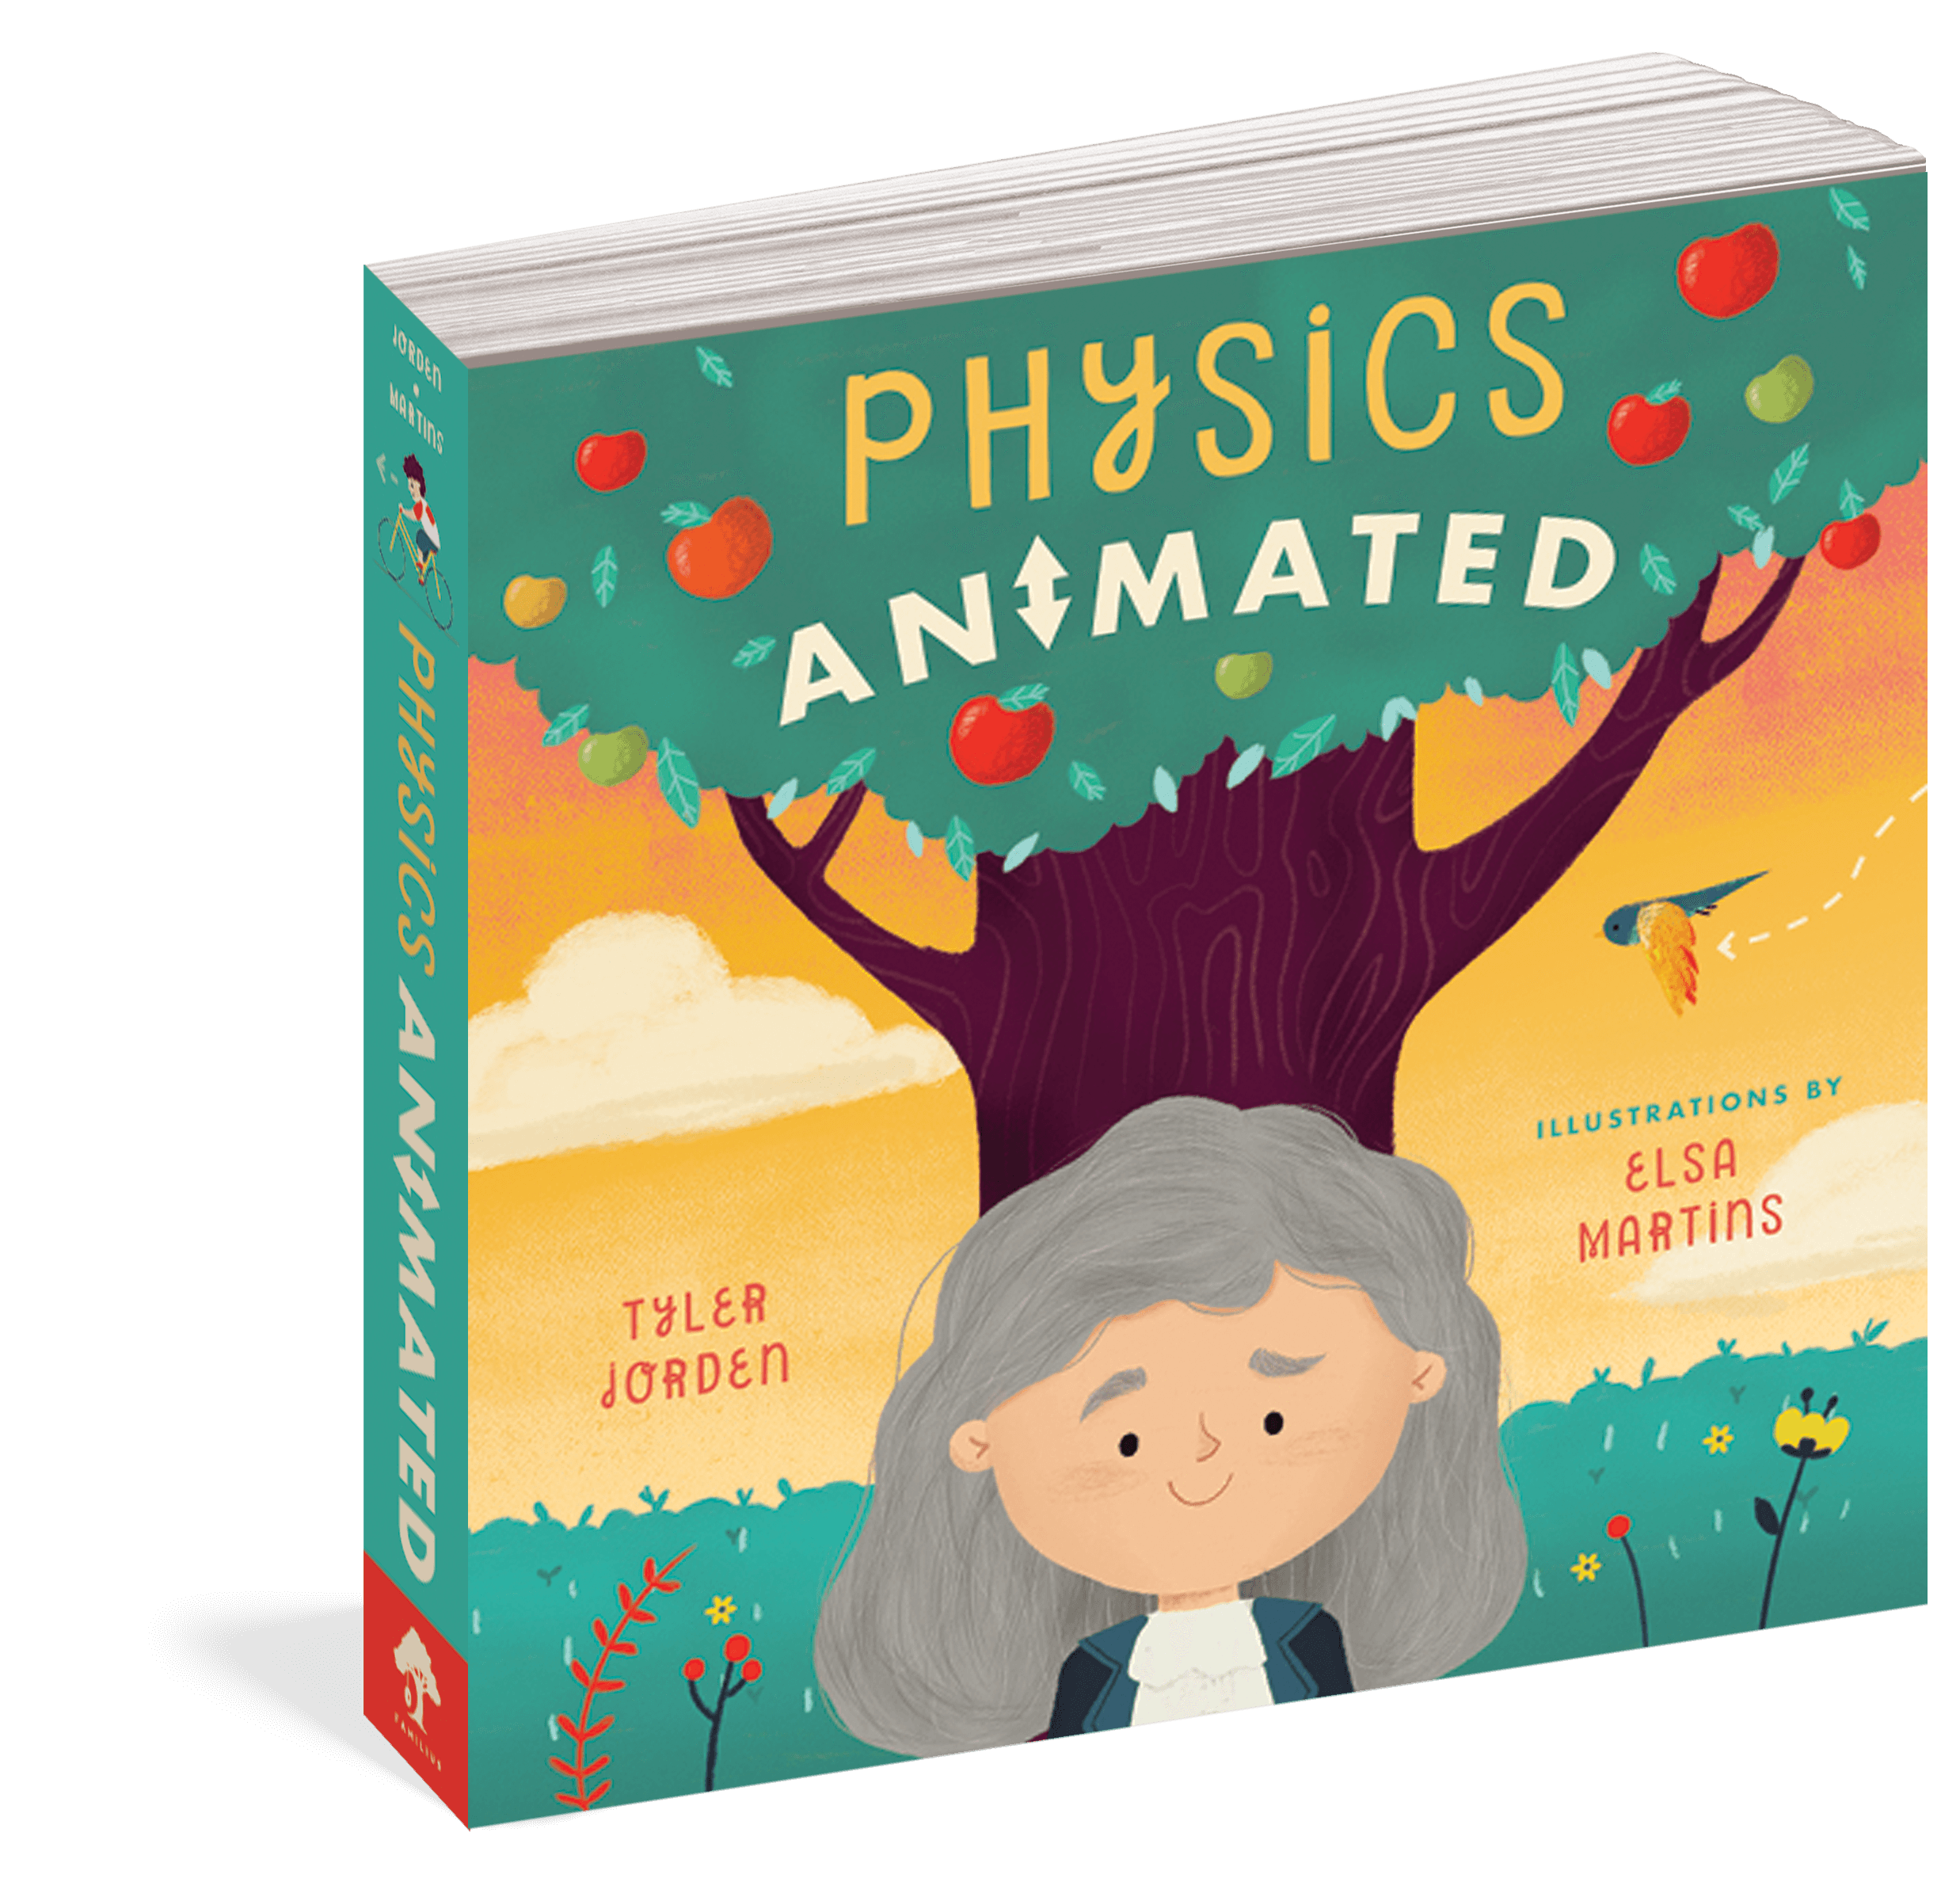 The cover of the board book Physics Animated!